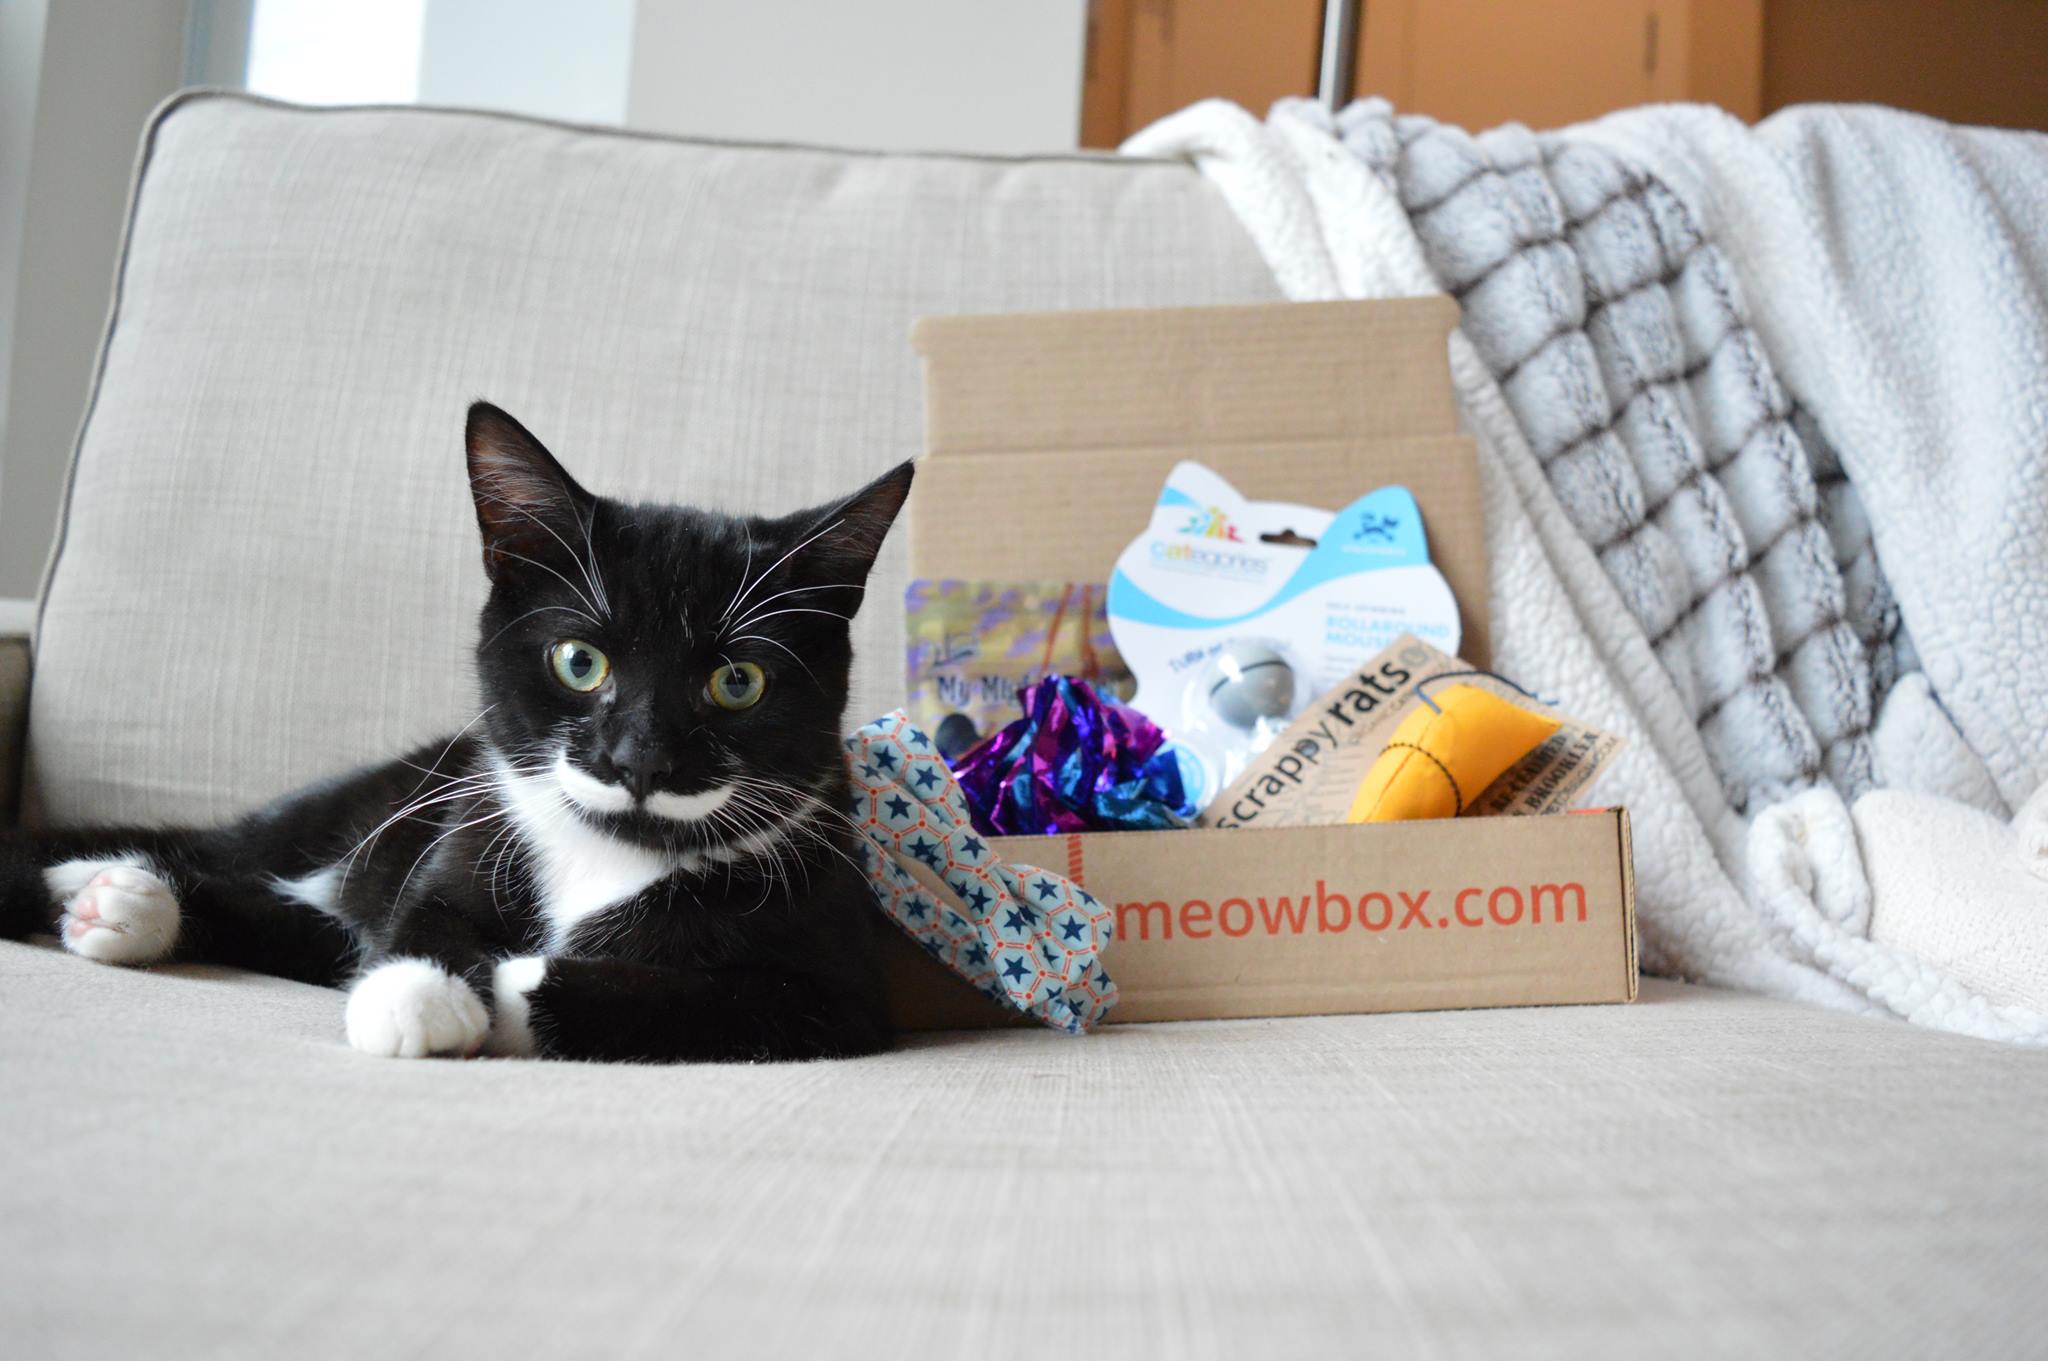 meowbox A monthly cat subscription box filled with fun unique toys